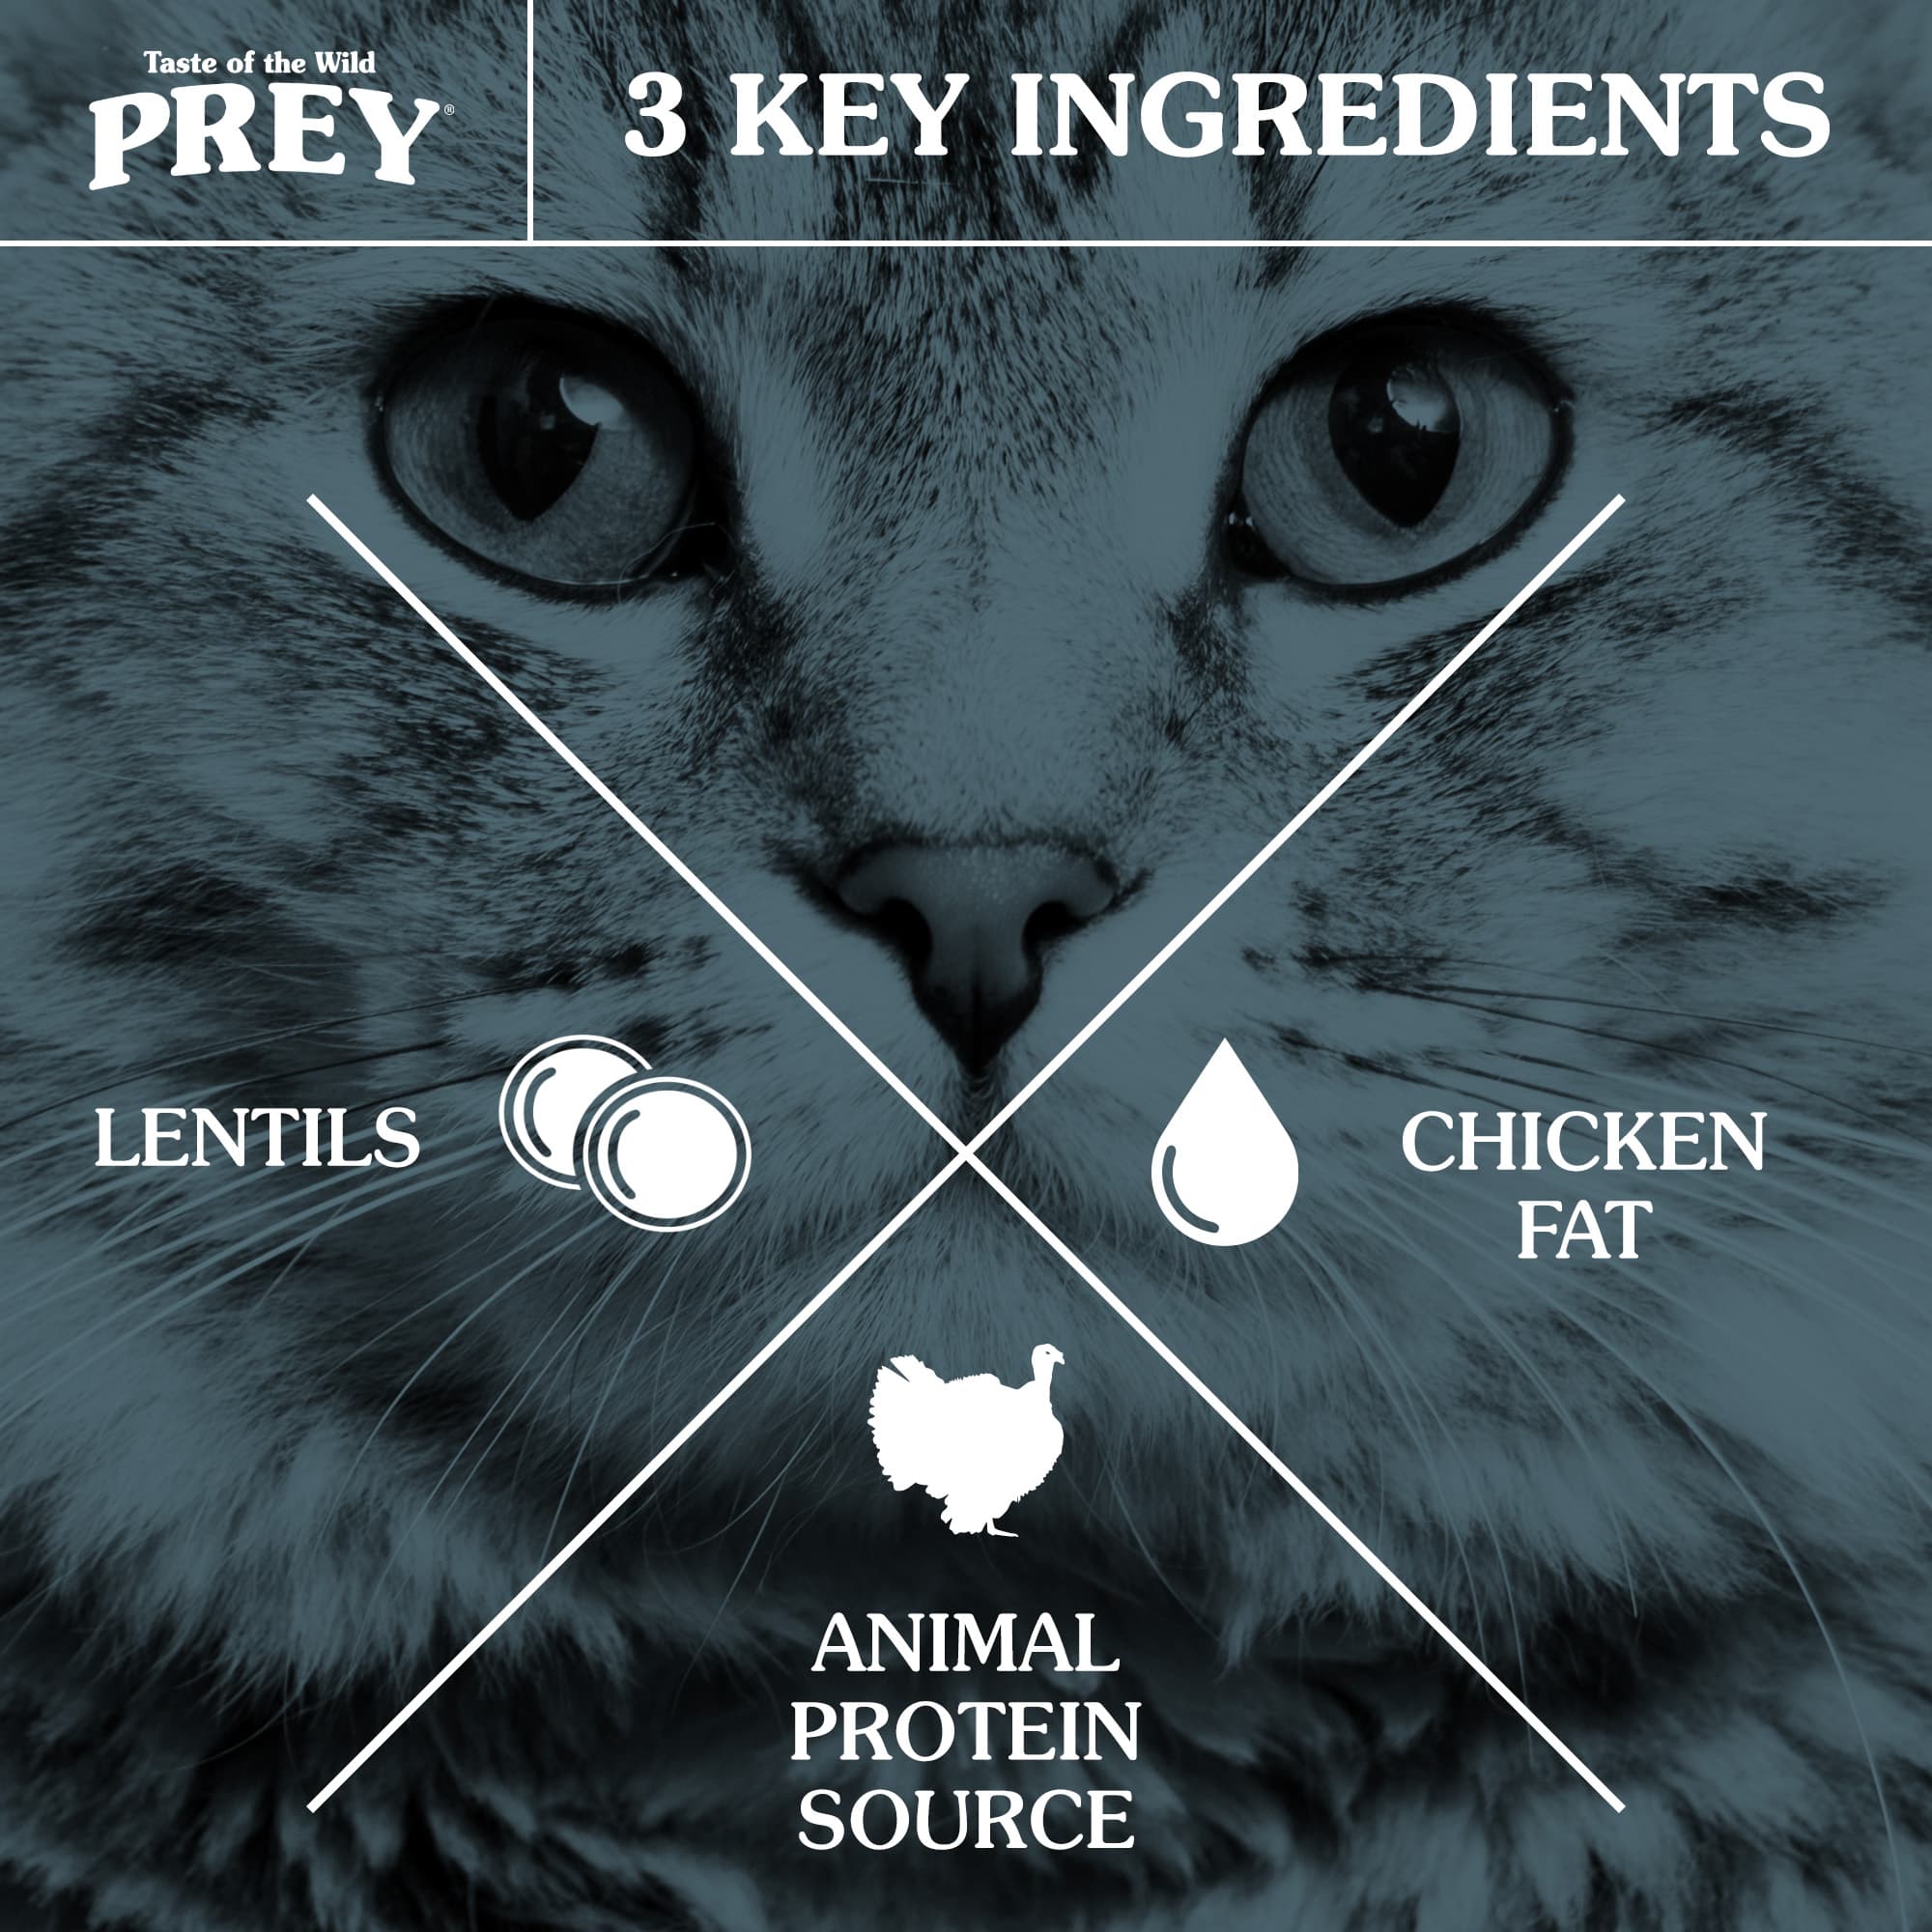 A cat's face overlaid with three key recipe ingredients including chicken fat, animal protein and lentils.